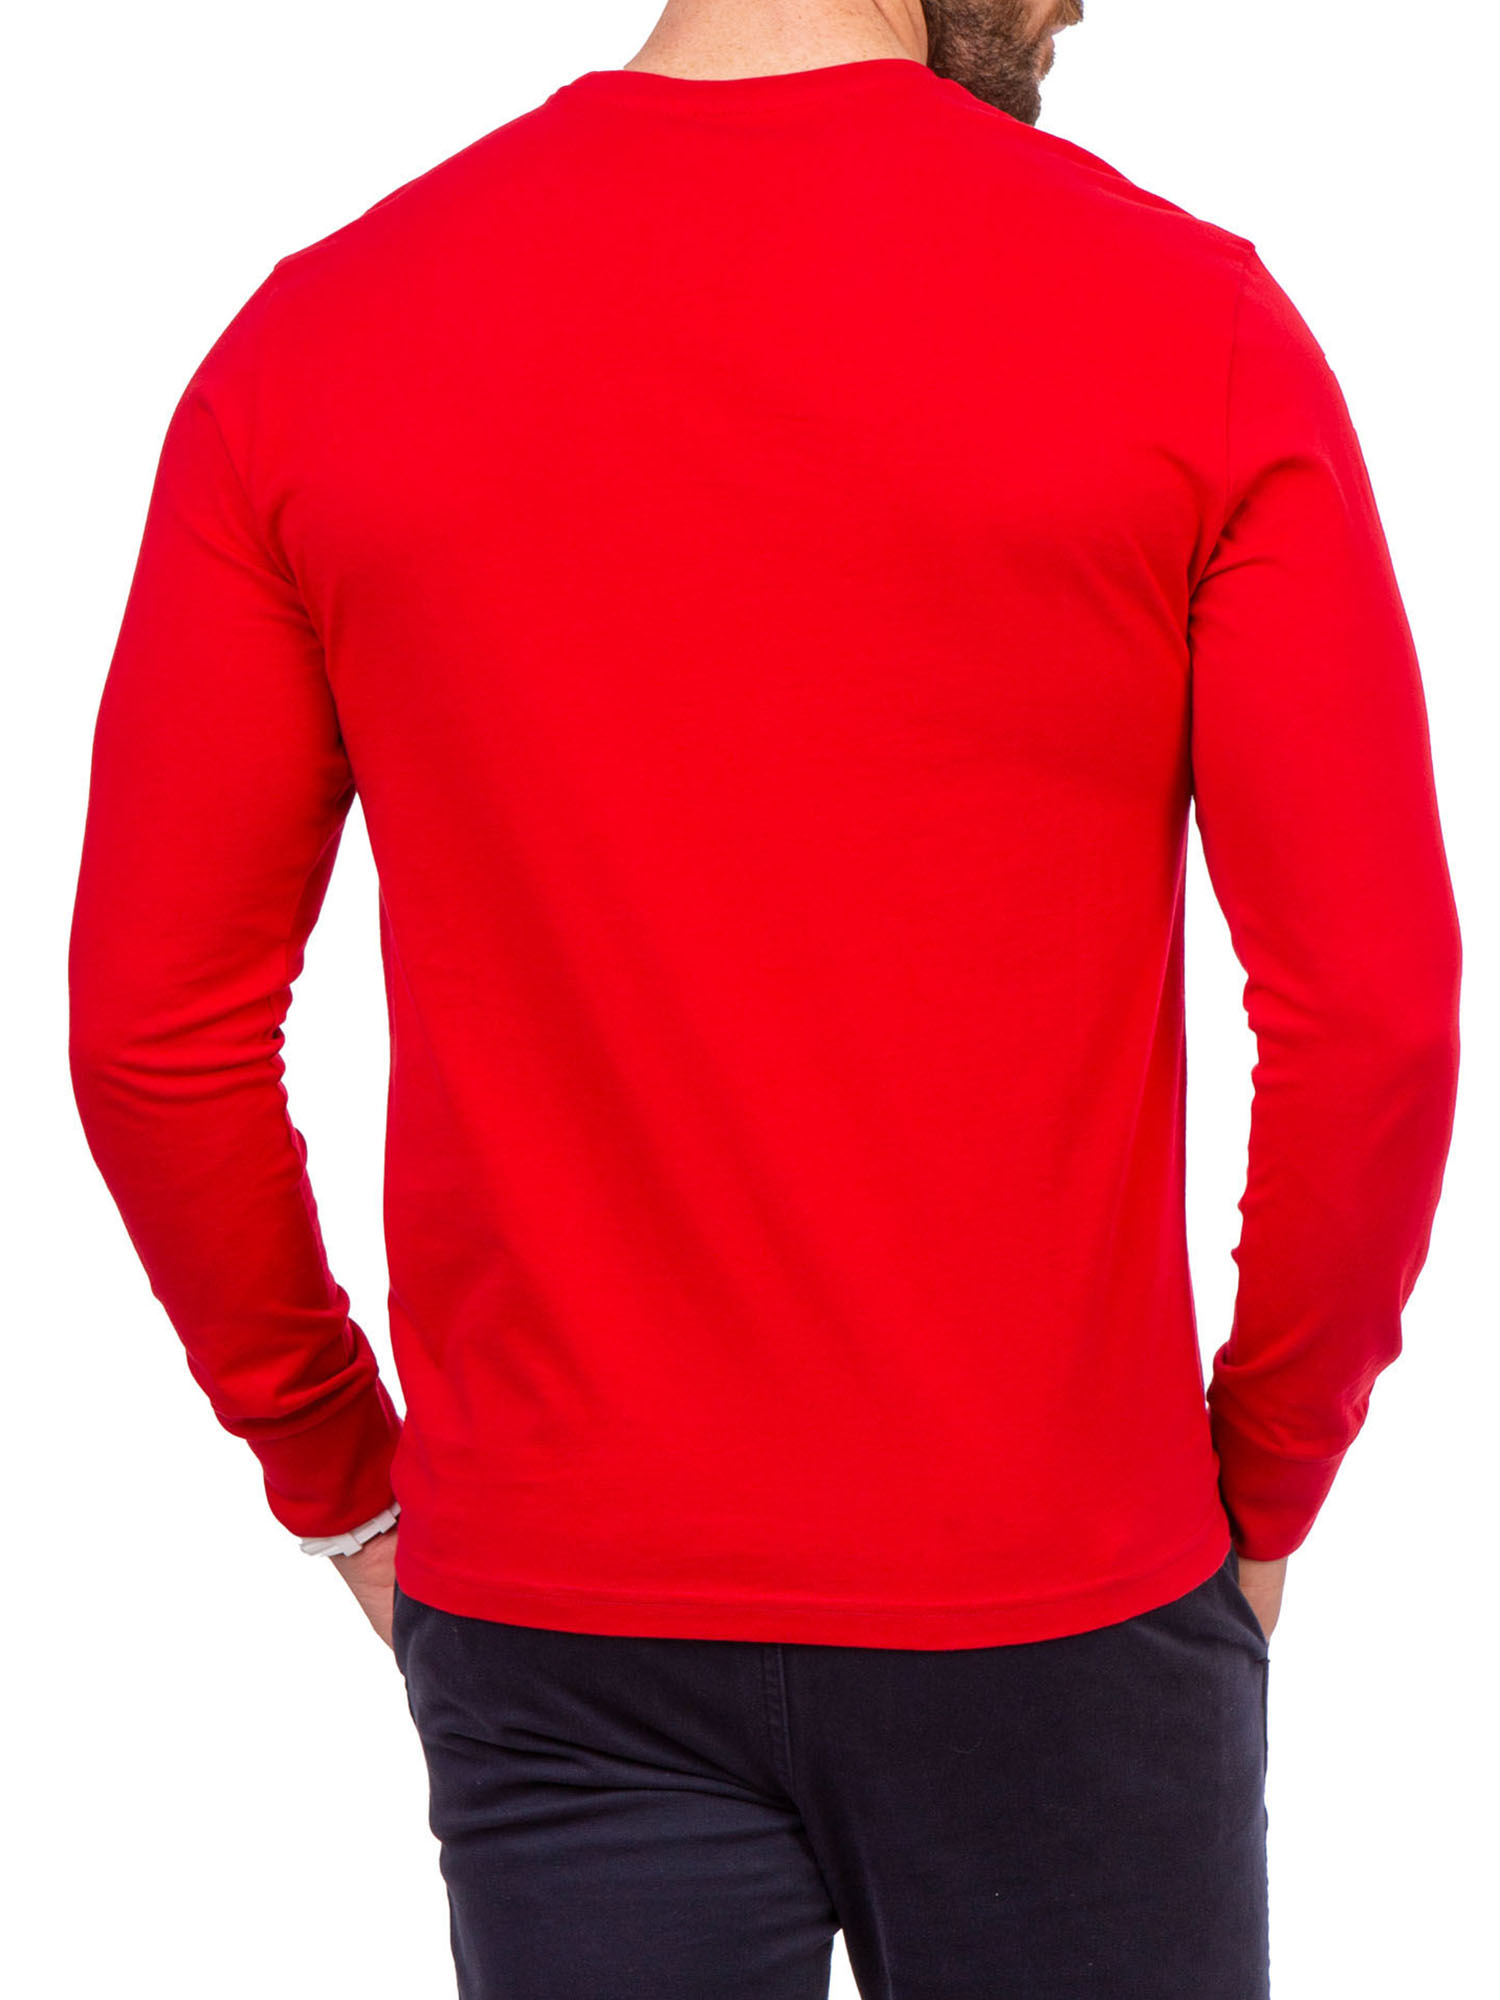 U.S. Polo Assn. Men's and Big Men's Long Sleeve Graphic T-Shirt - image 2 of 7